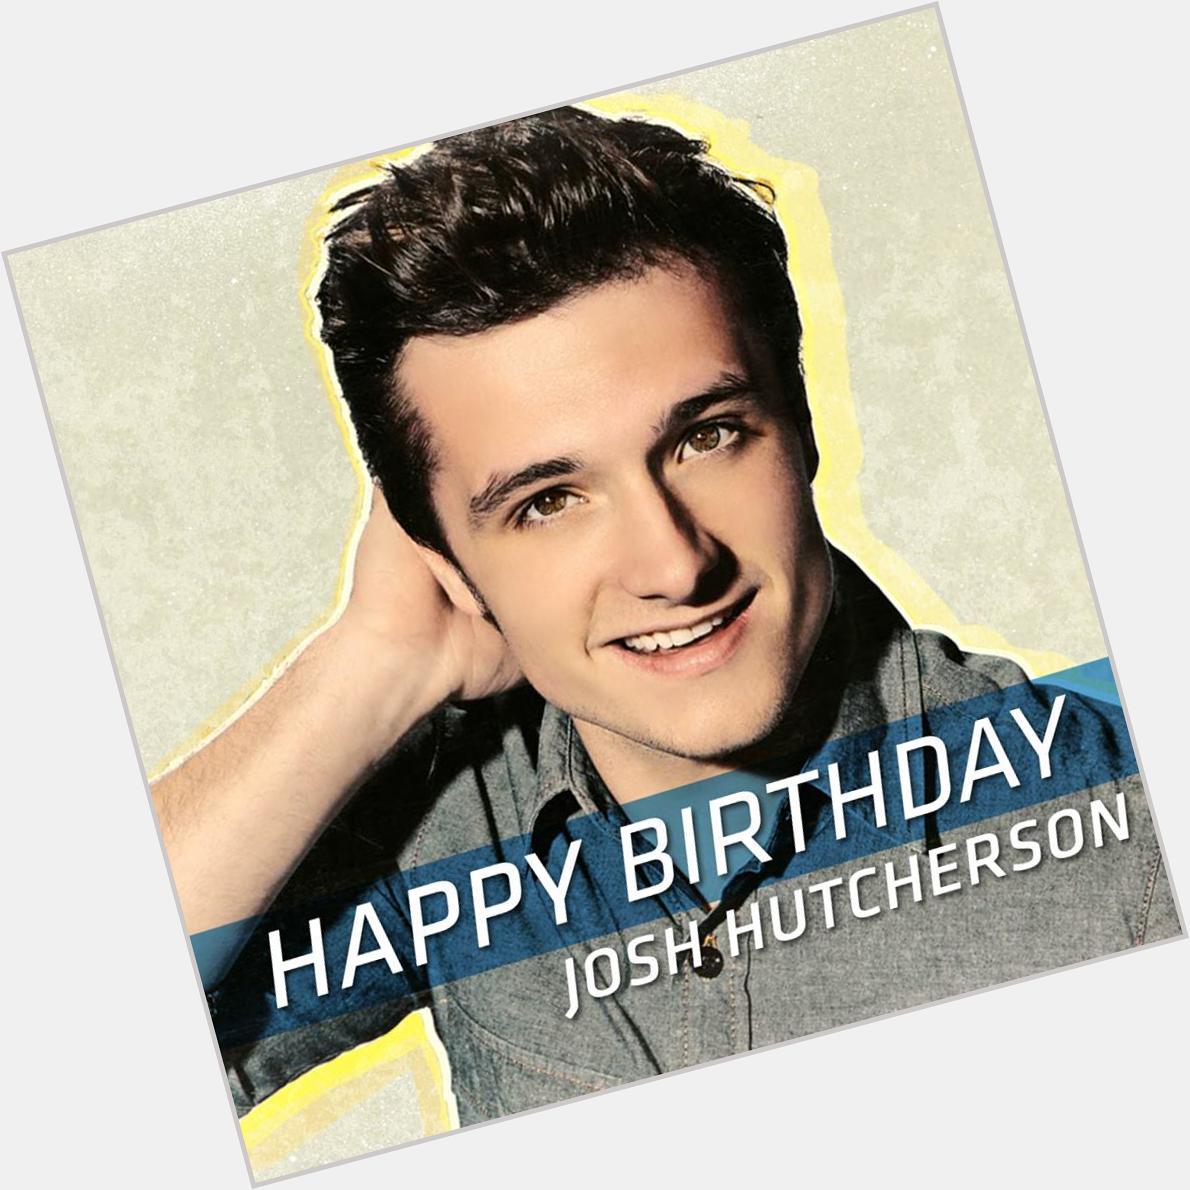 Happy Birthday Josh Hutcherson! The Hunger Games star turns 23 today. See him in action in MOCKINGJAY PA2 Nov 20! 